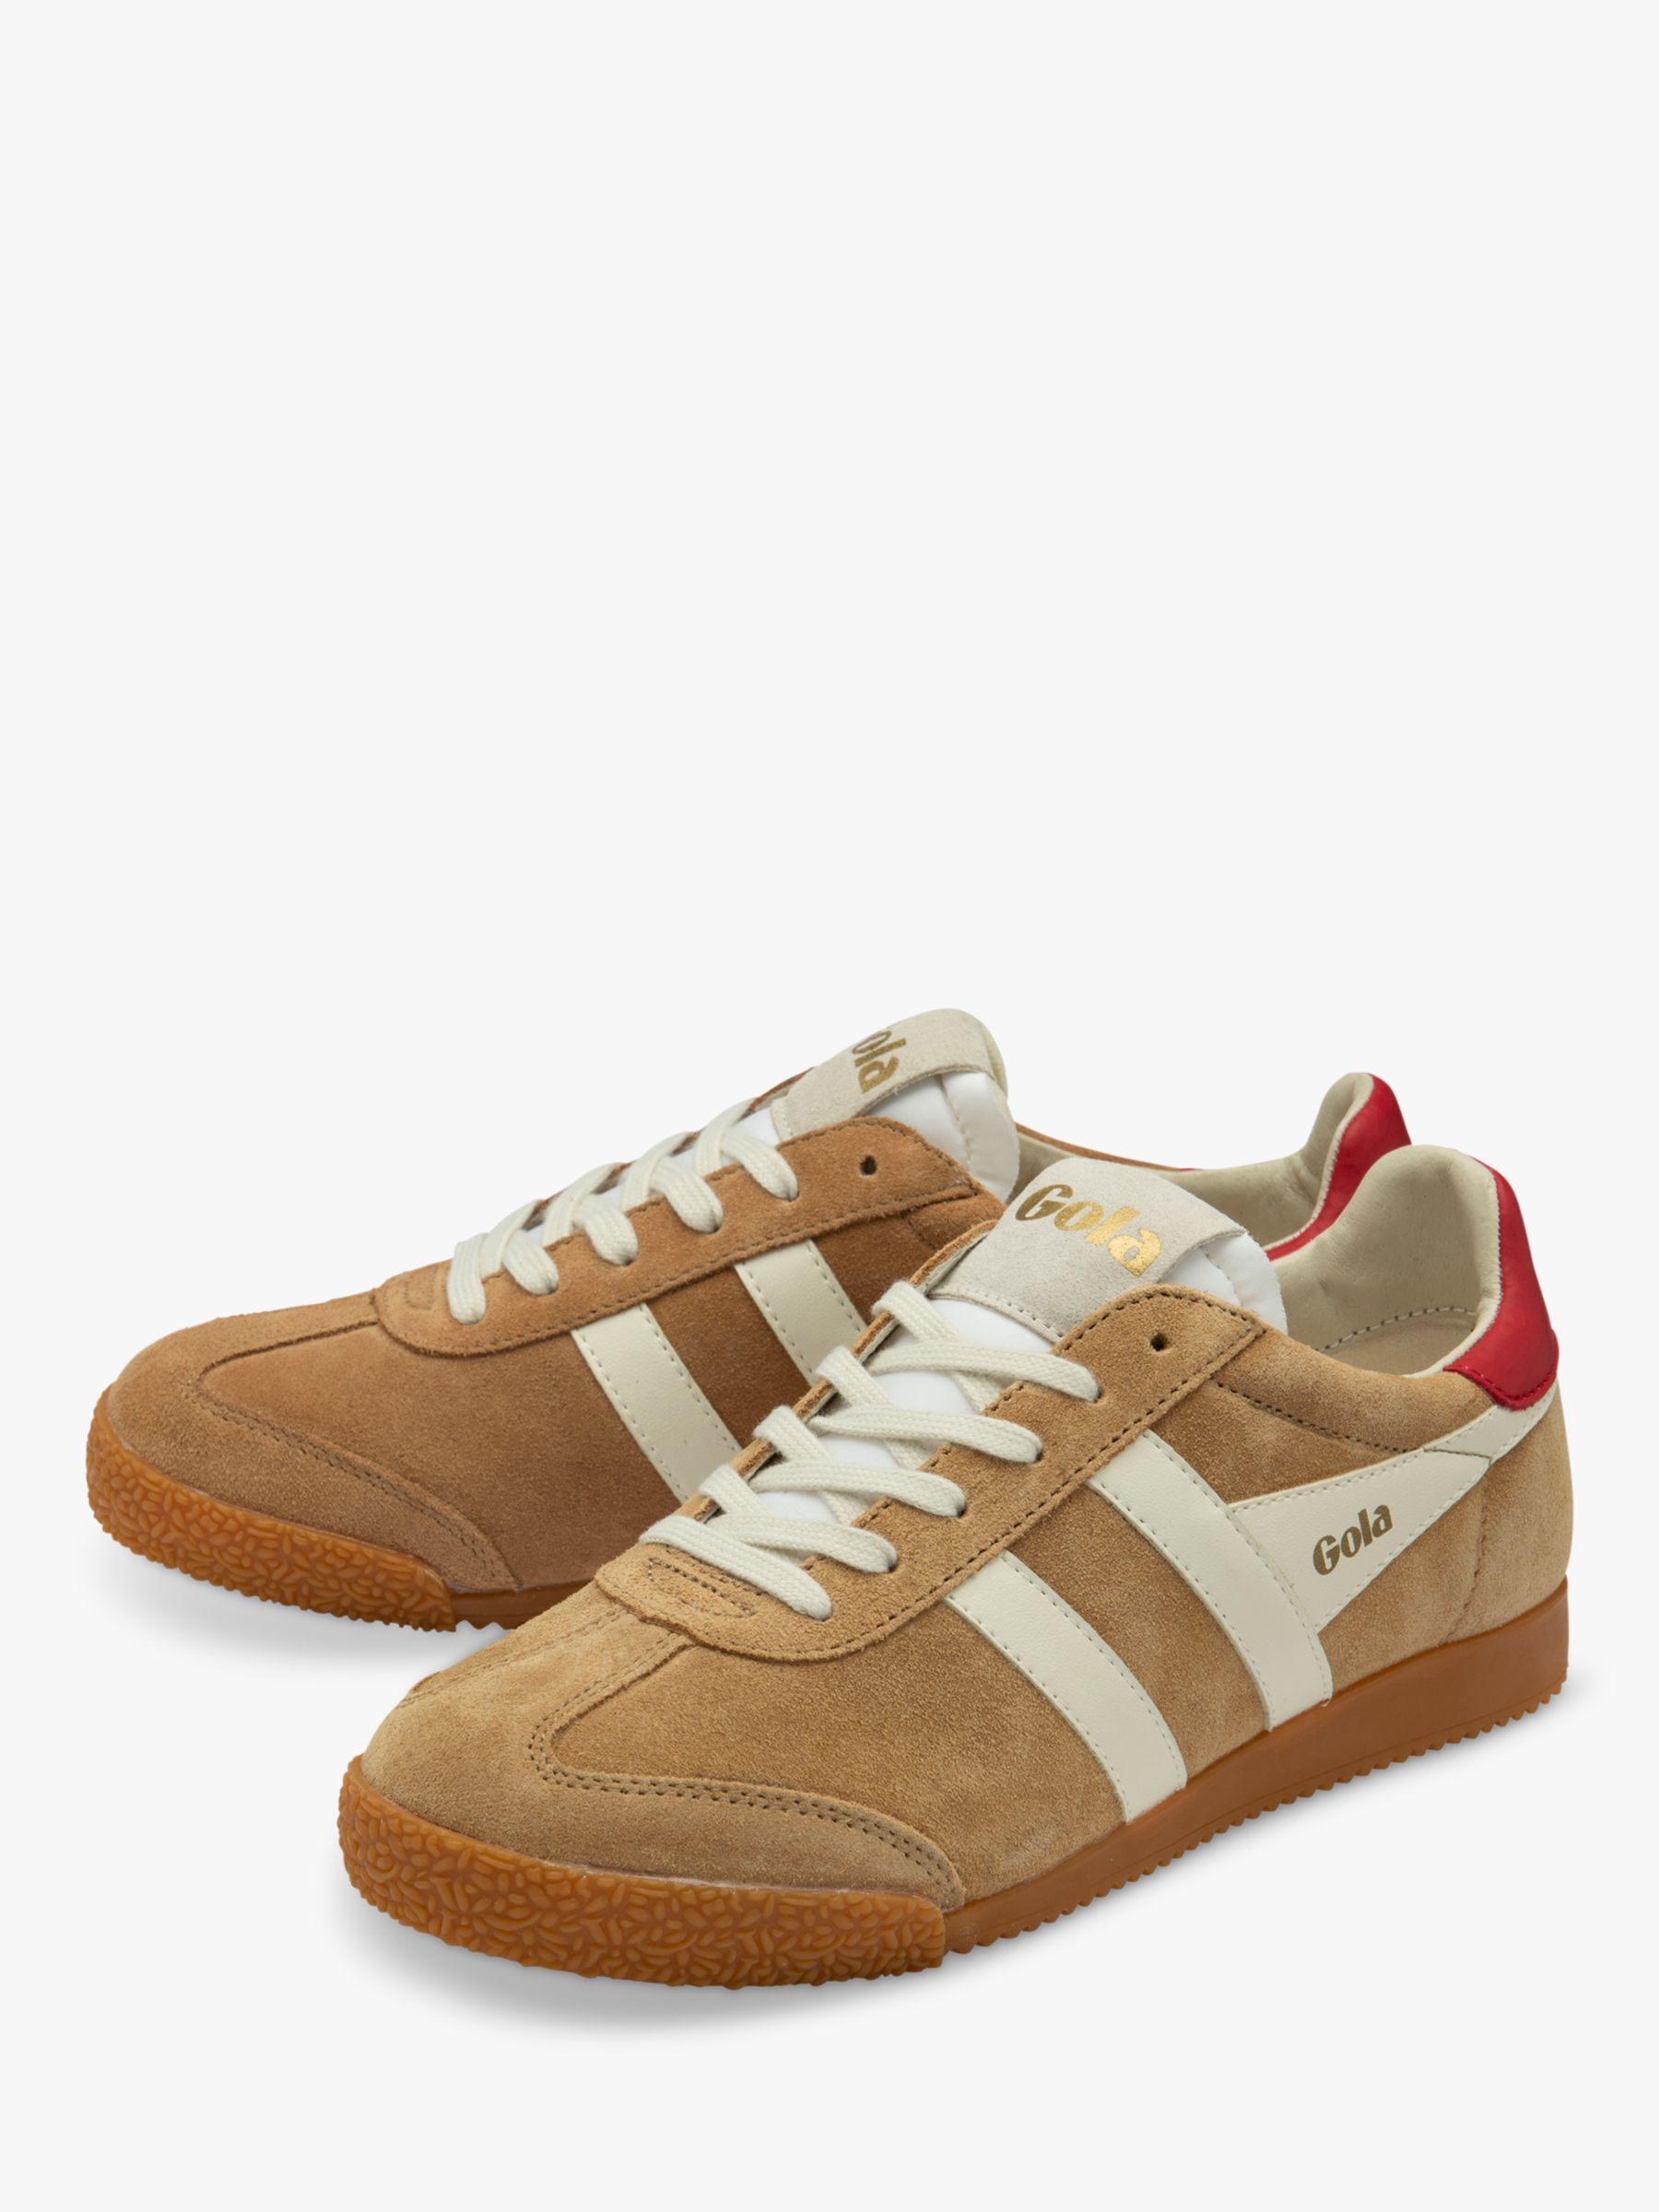 Gola Classics Elan Suede Lace Up Trainers, Caramel/White/Red at John ...